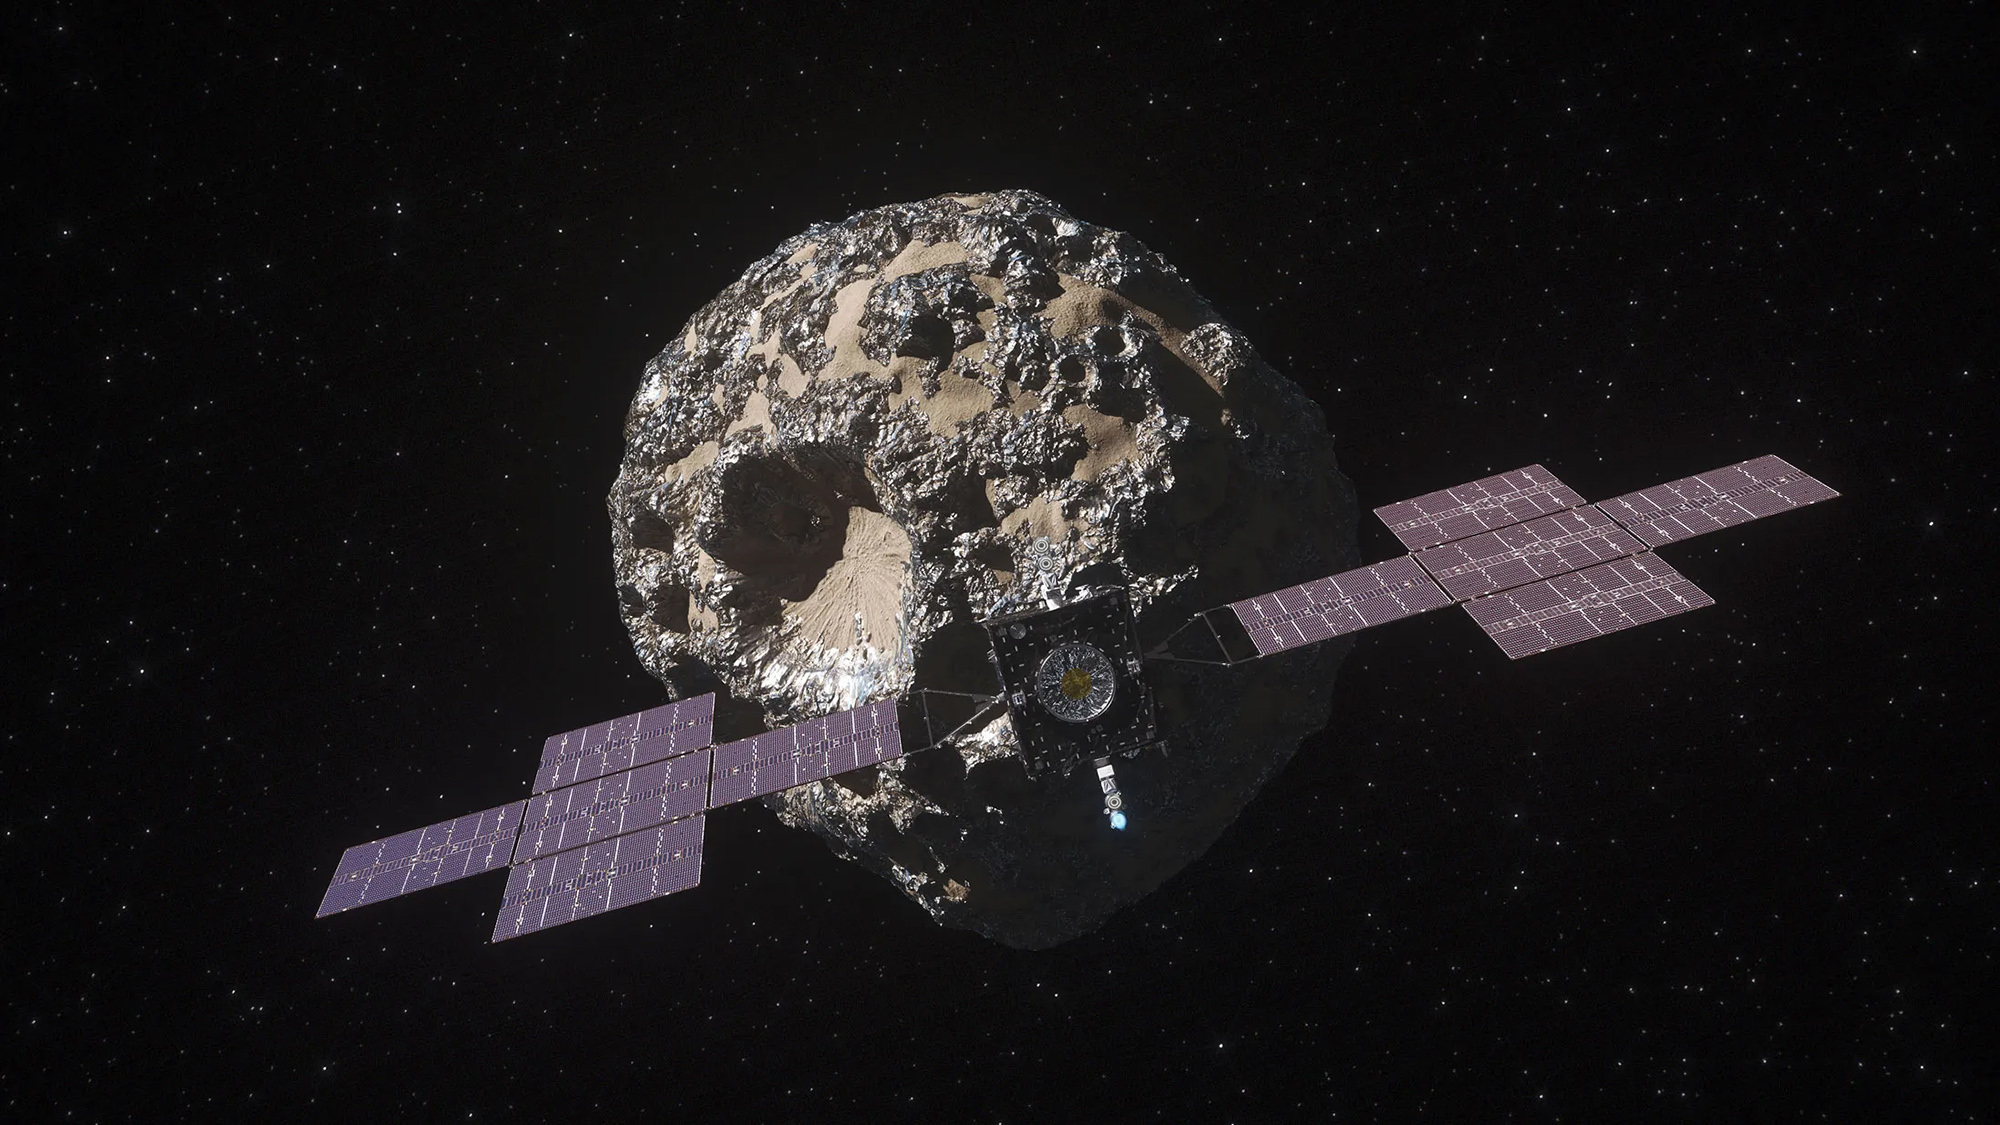 An illustration depicts a NASA spacecraft approaching the metal-rich asteroid Psyche. Though there are no plans to mine Psyche, such asteroids are being eyed for their valuable resources.